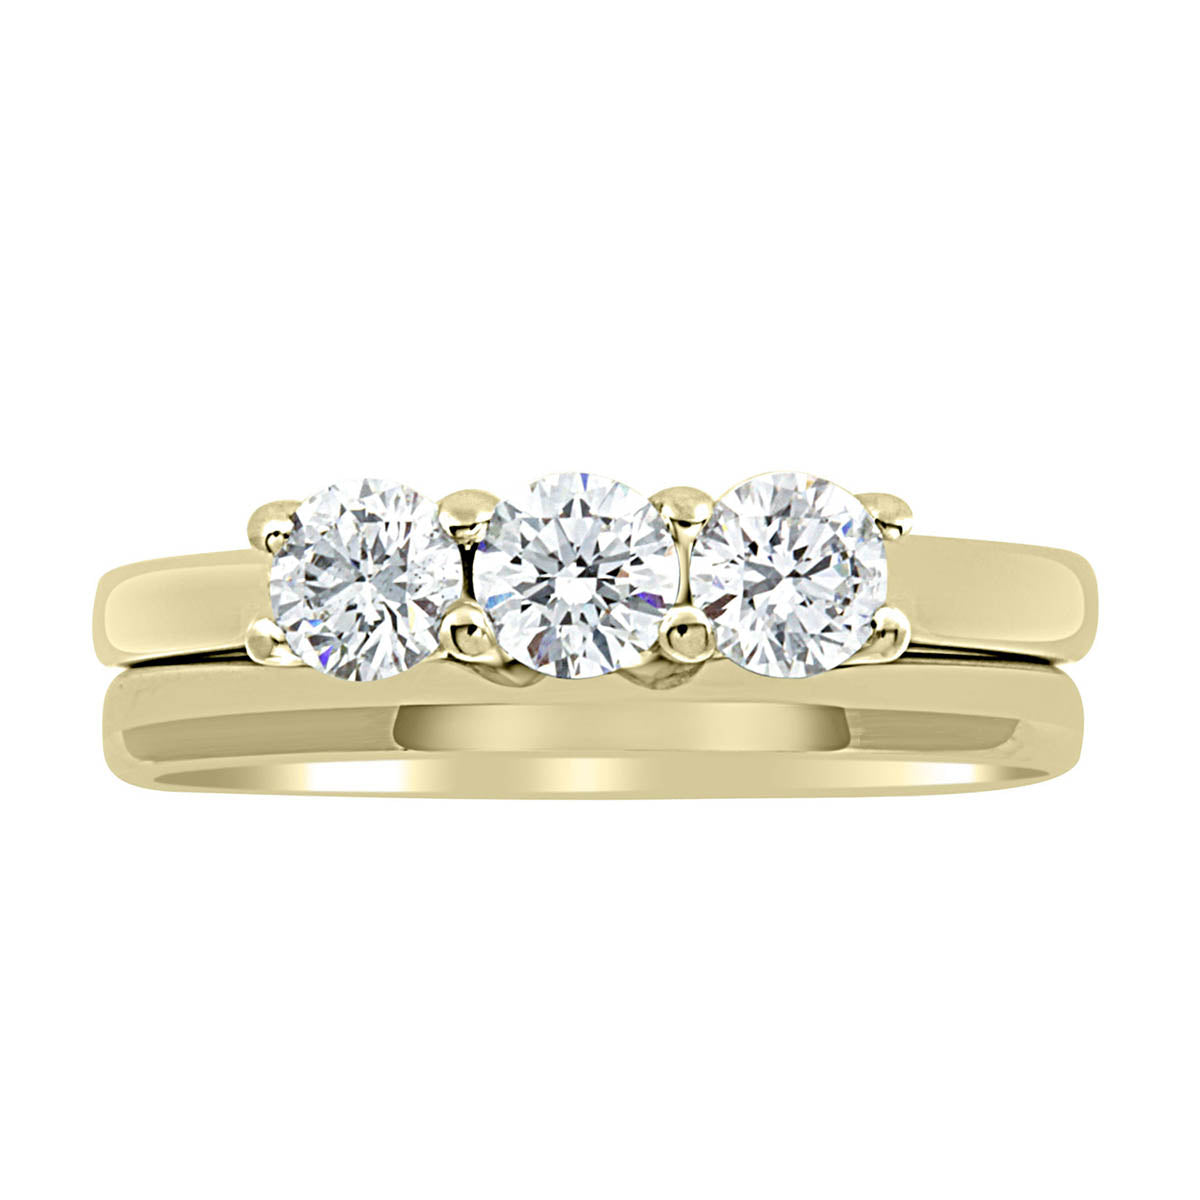 Three Stone Engagement Ring made of yellow gold with a plain wedding ring